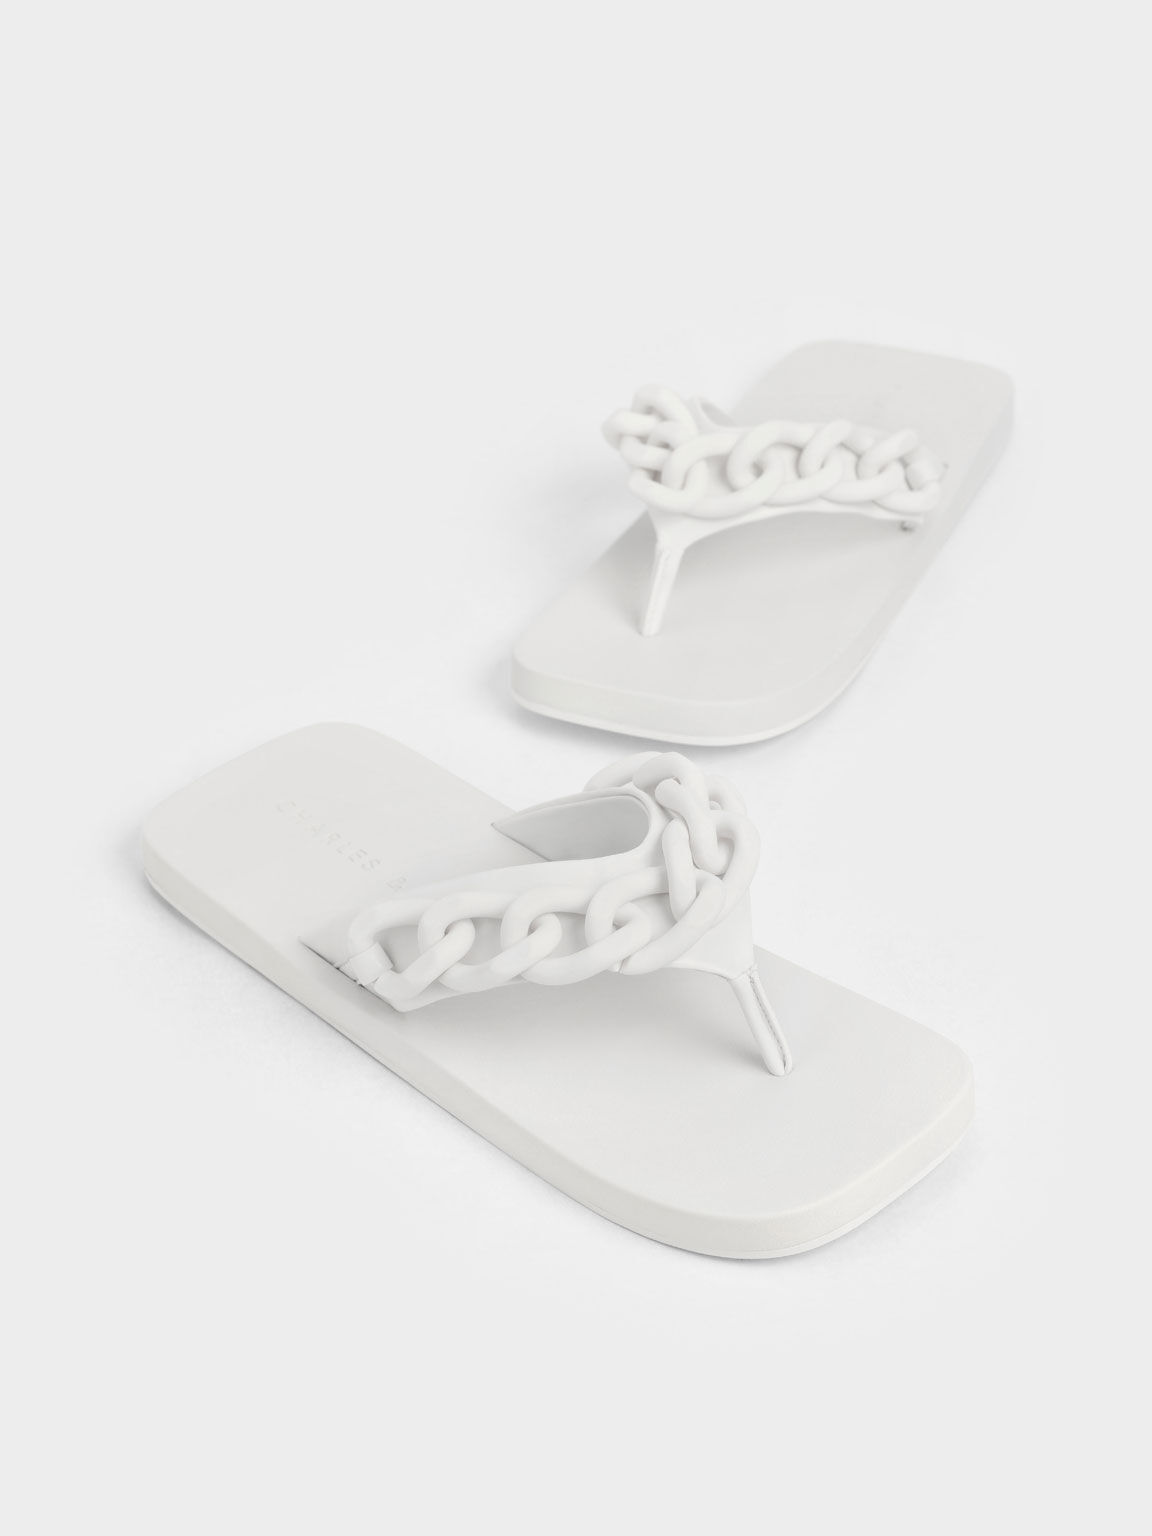 Chain Link Thong Sandals, White, hi-res